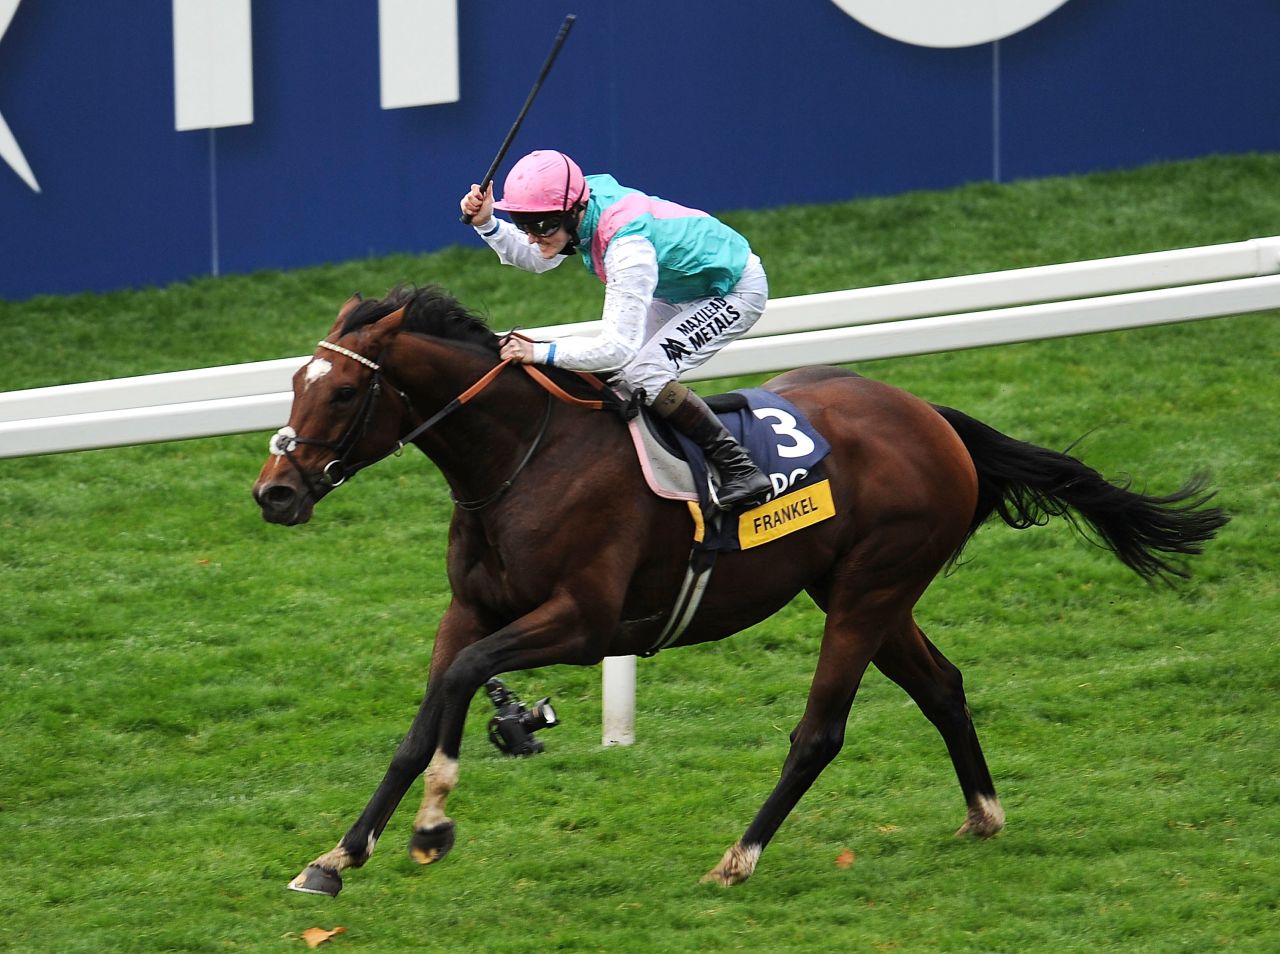 Tom Queally partners Frankel to victory in the unbeaten wonder horse's final race in the Champions Stakes, sponsored by QIPCO, at Ascot in October 2012.